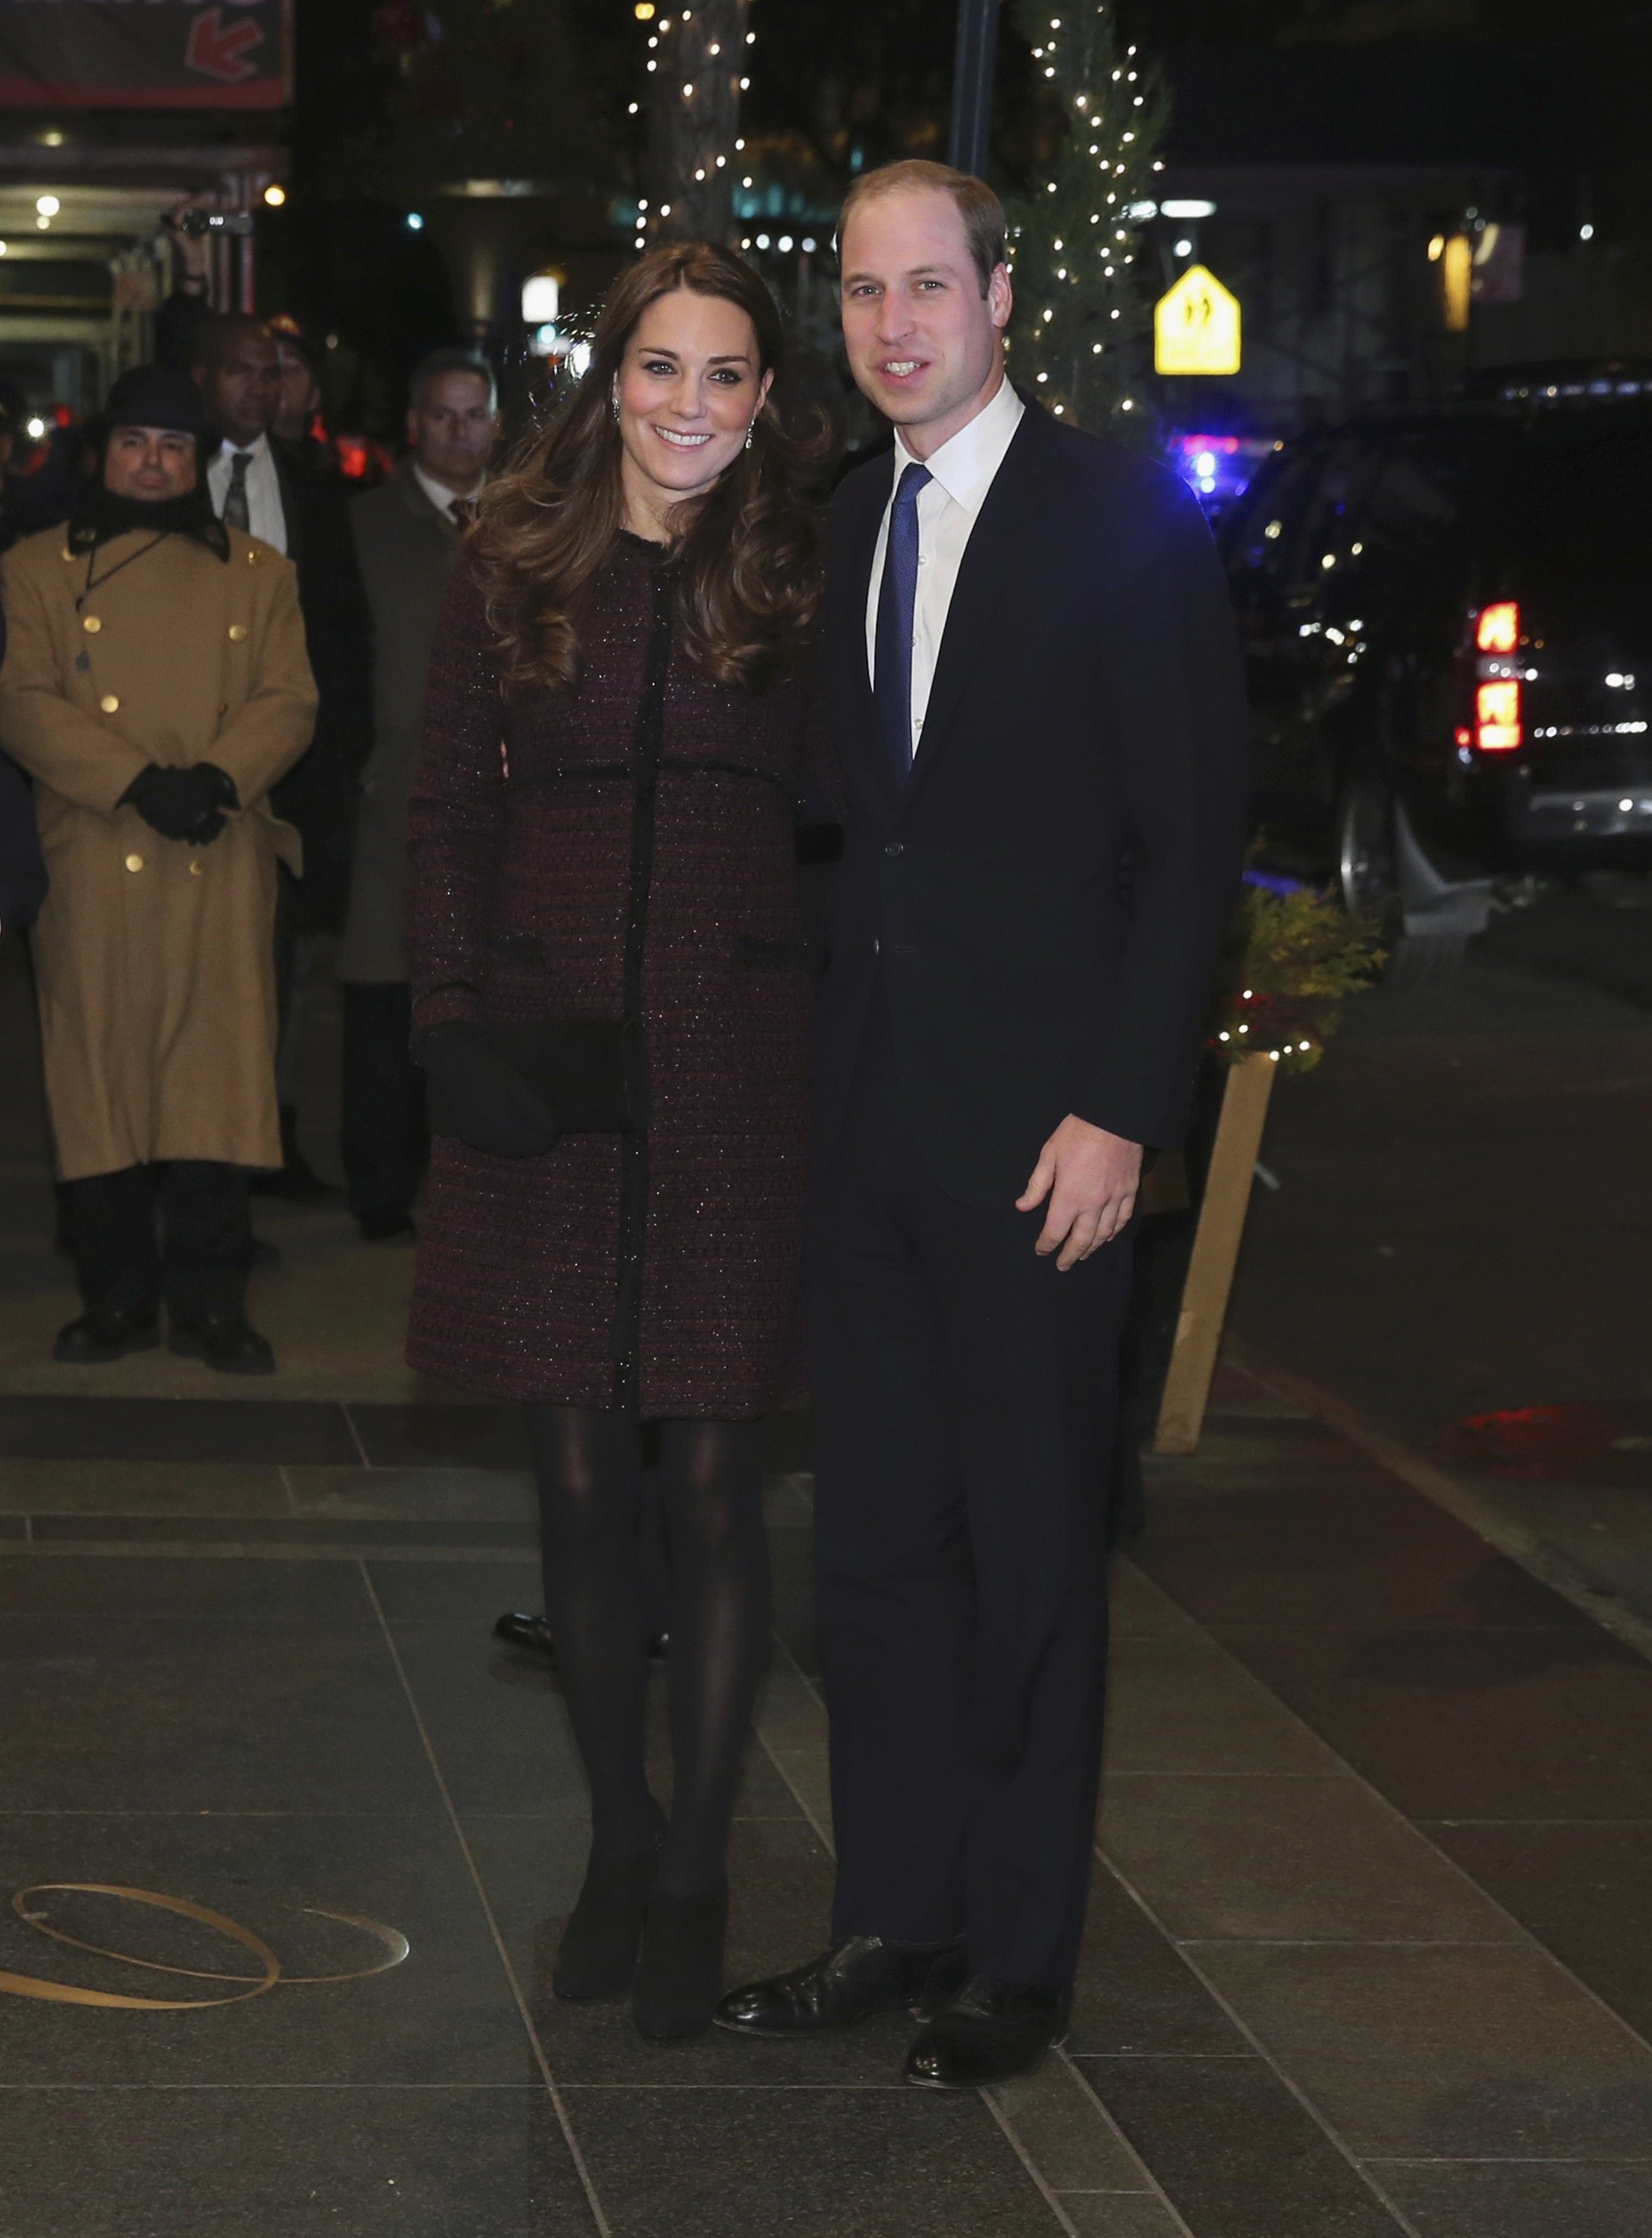 Catherine, Duchess of Cambridge and Britain's Prince William, Duke of Cambridge arrive at the Carlyle hotel in New York on Dec. 7, 2014. (Reuters)